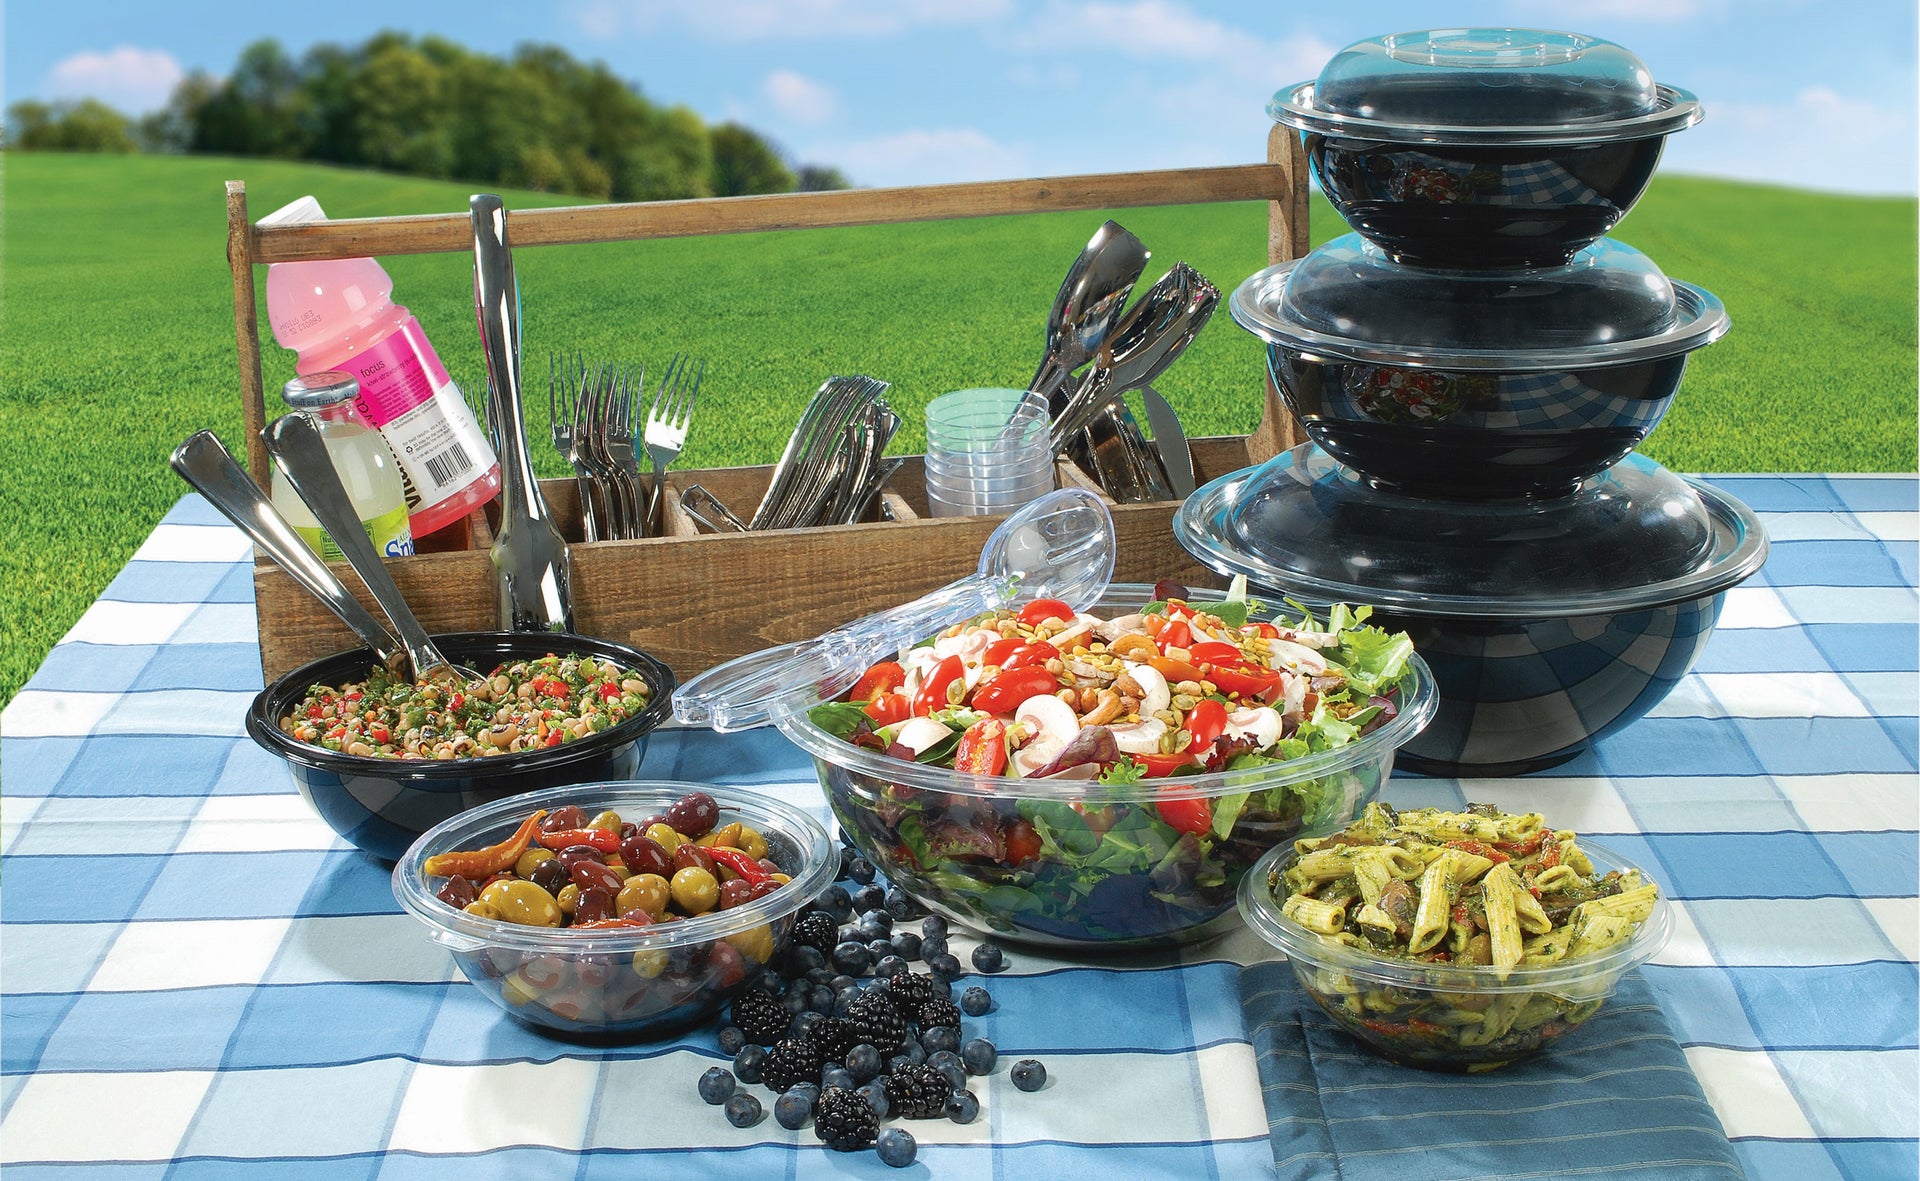 The Best Picnic Partyware to Make Outdoor Dining Special